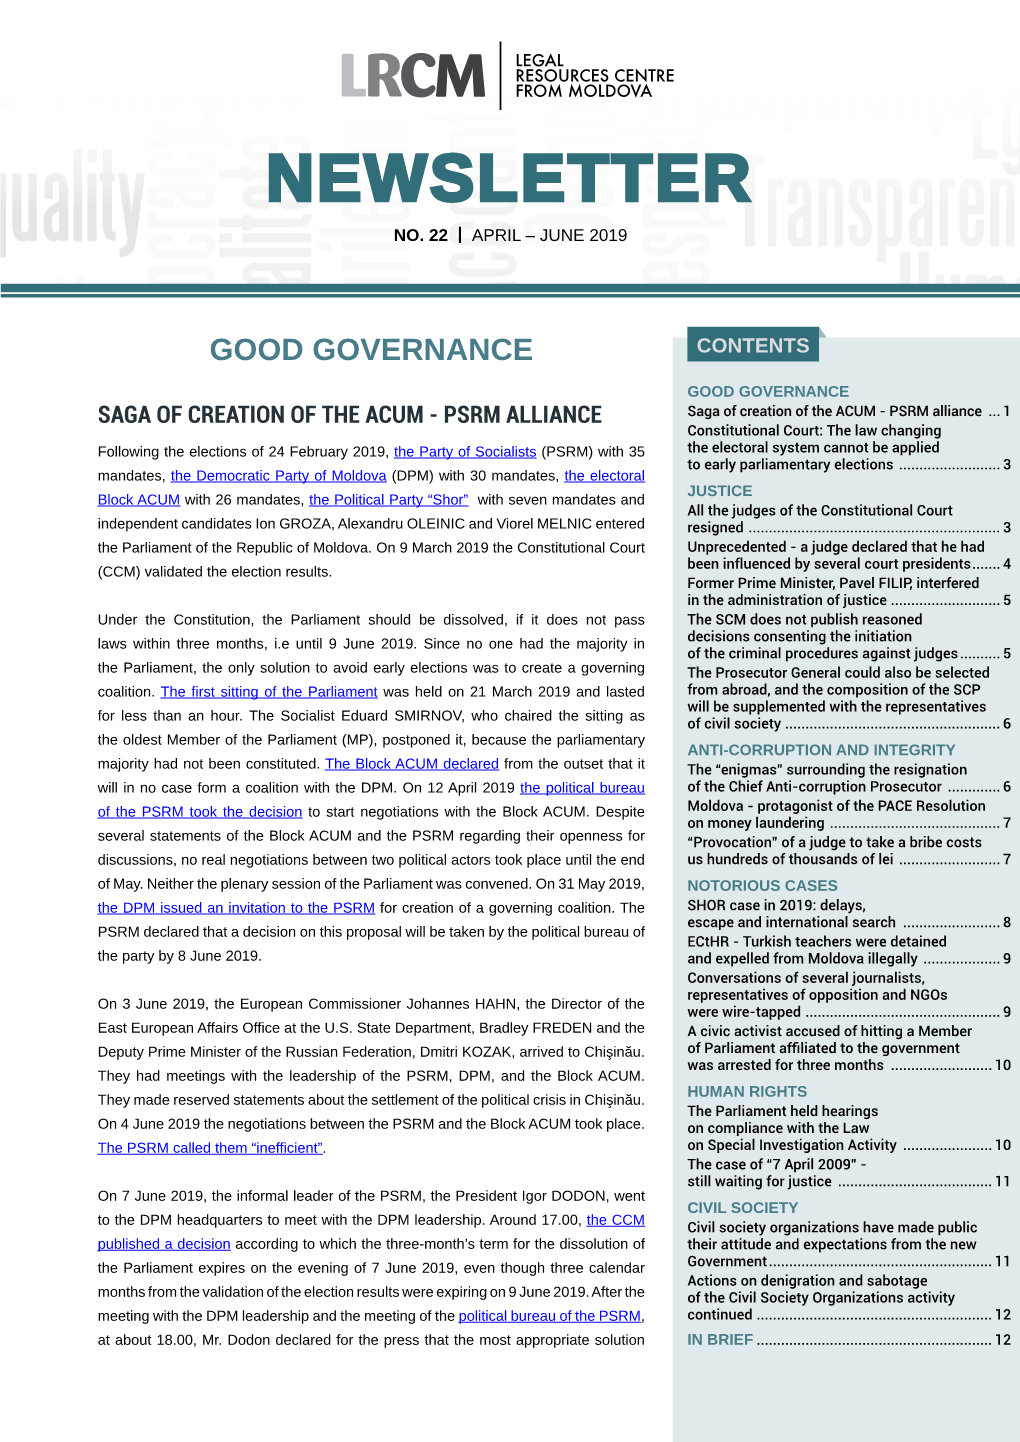 Good Governance Contents